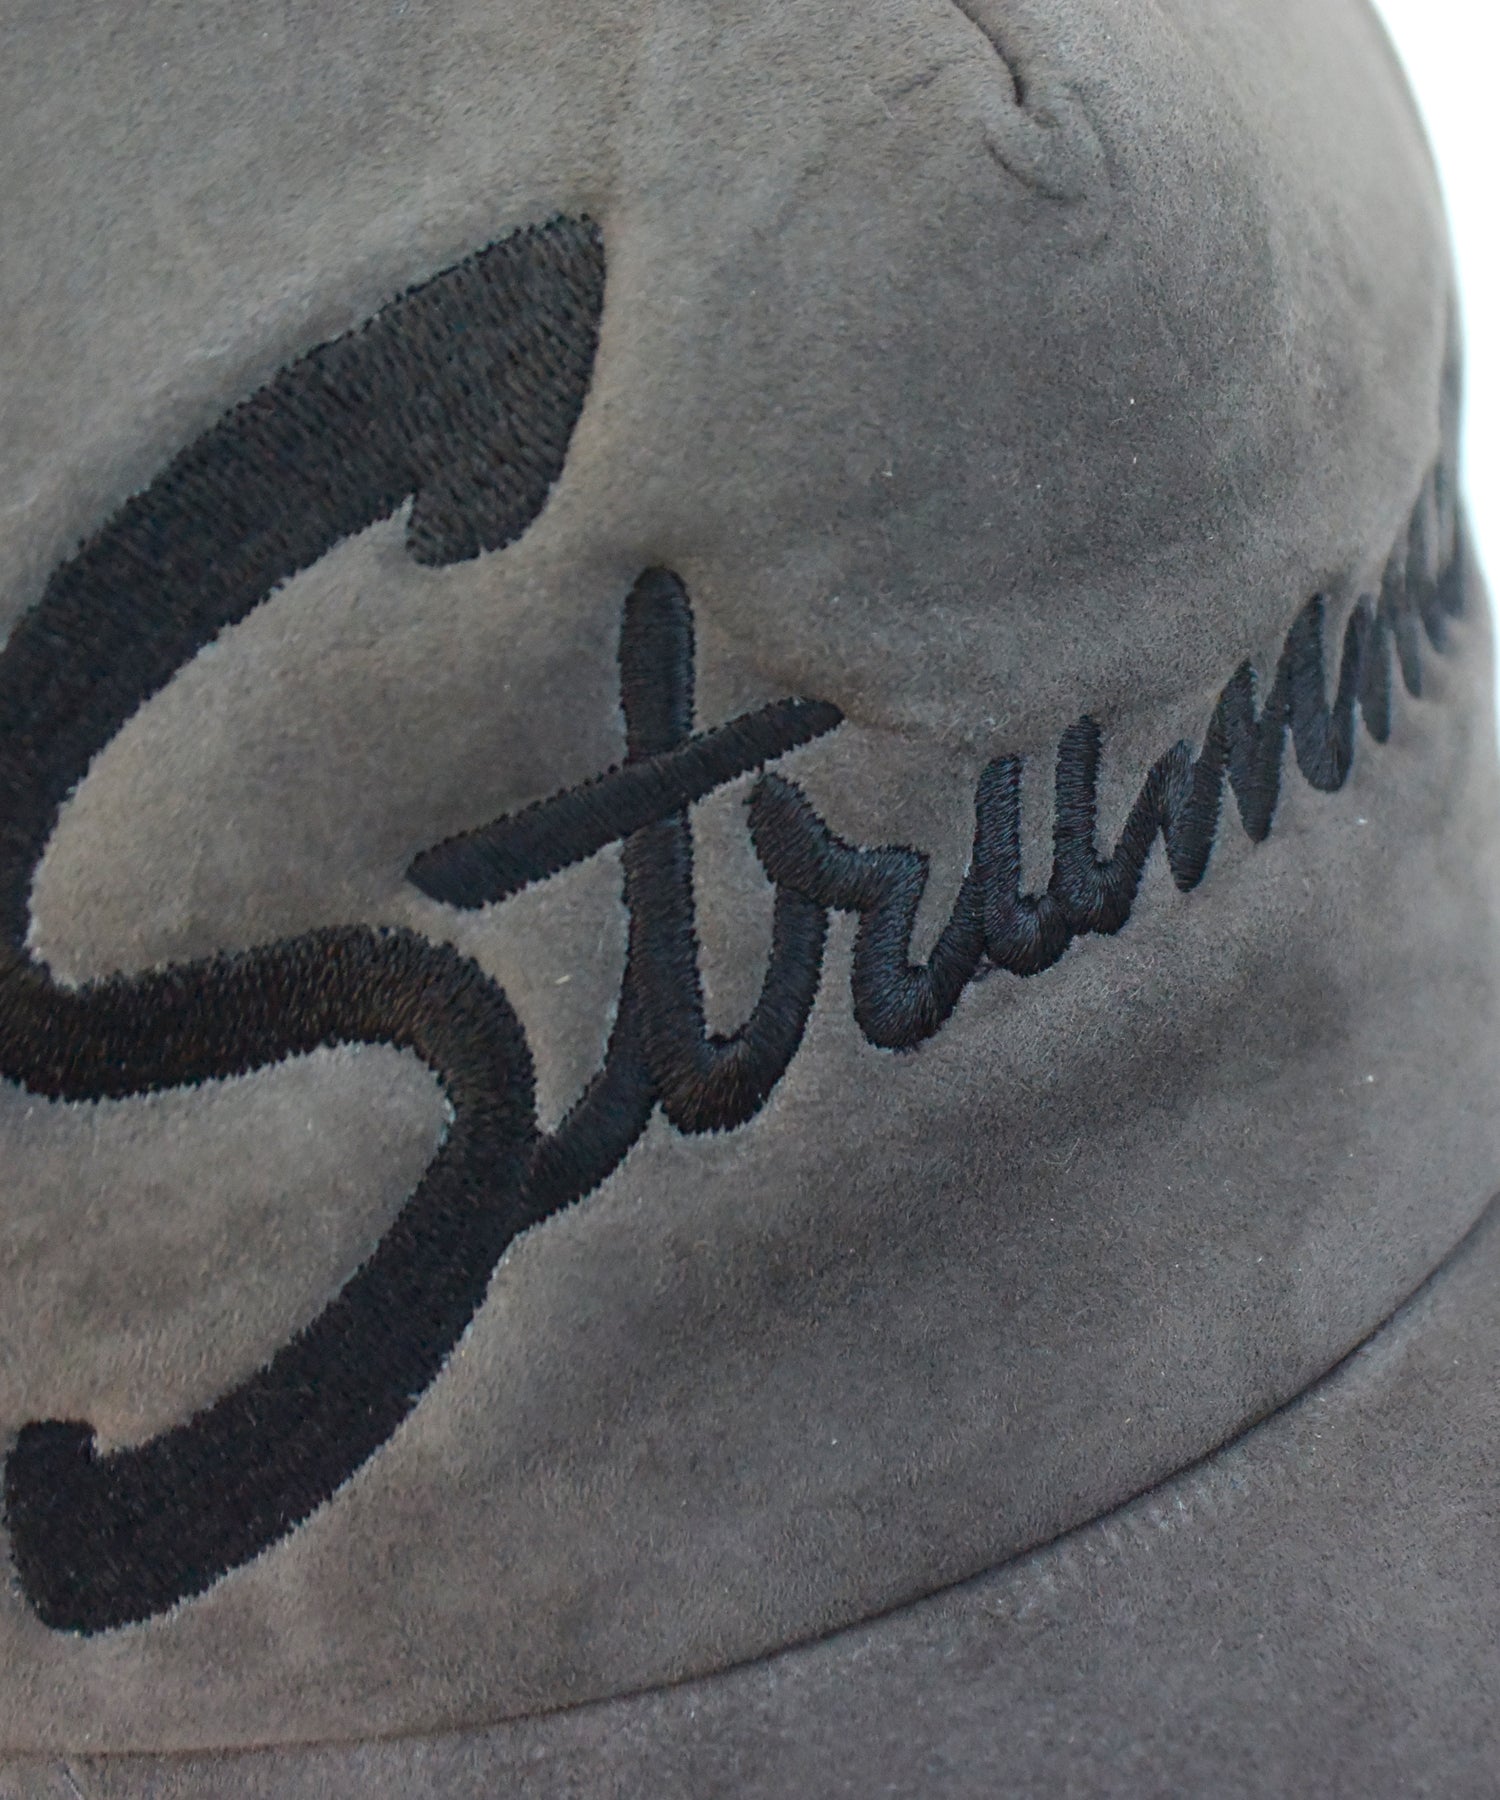 Load image into Gallery viewer, Strummer Leather Cap / GRAY